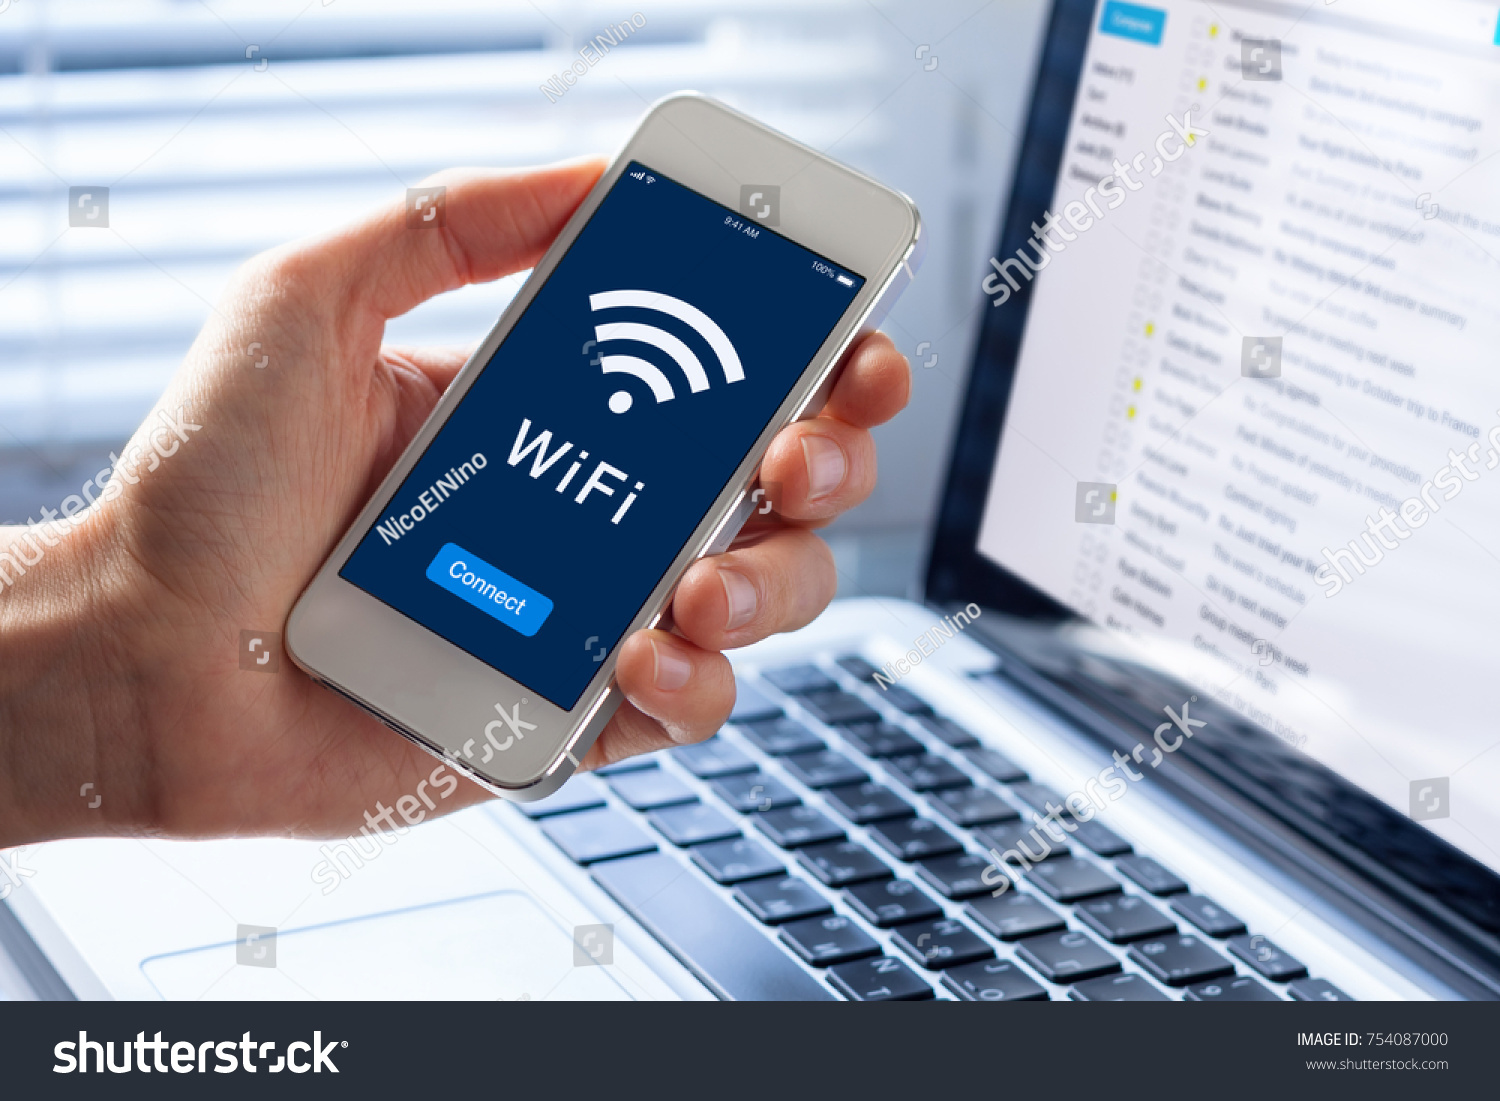 WiFi symbol on smartphone screen with button to connect to wireless internet, close-up of hand holding mobile phone, computer in background #754087000